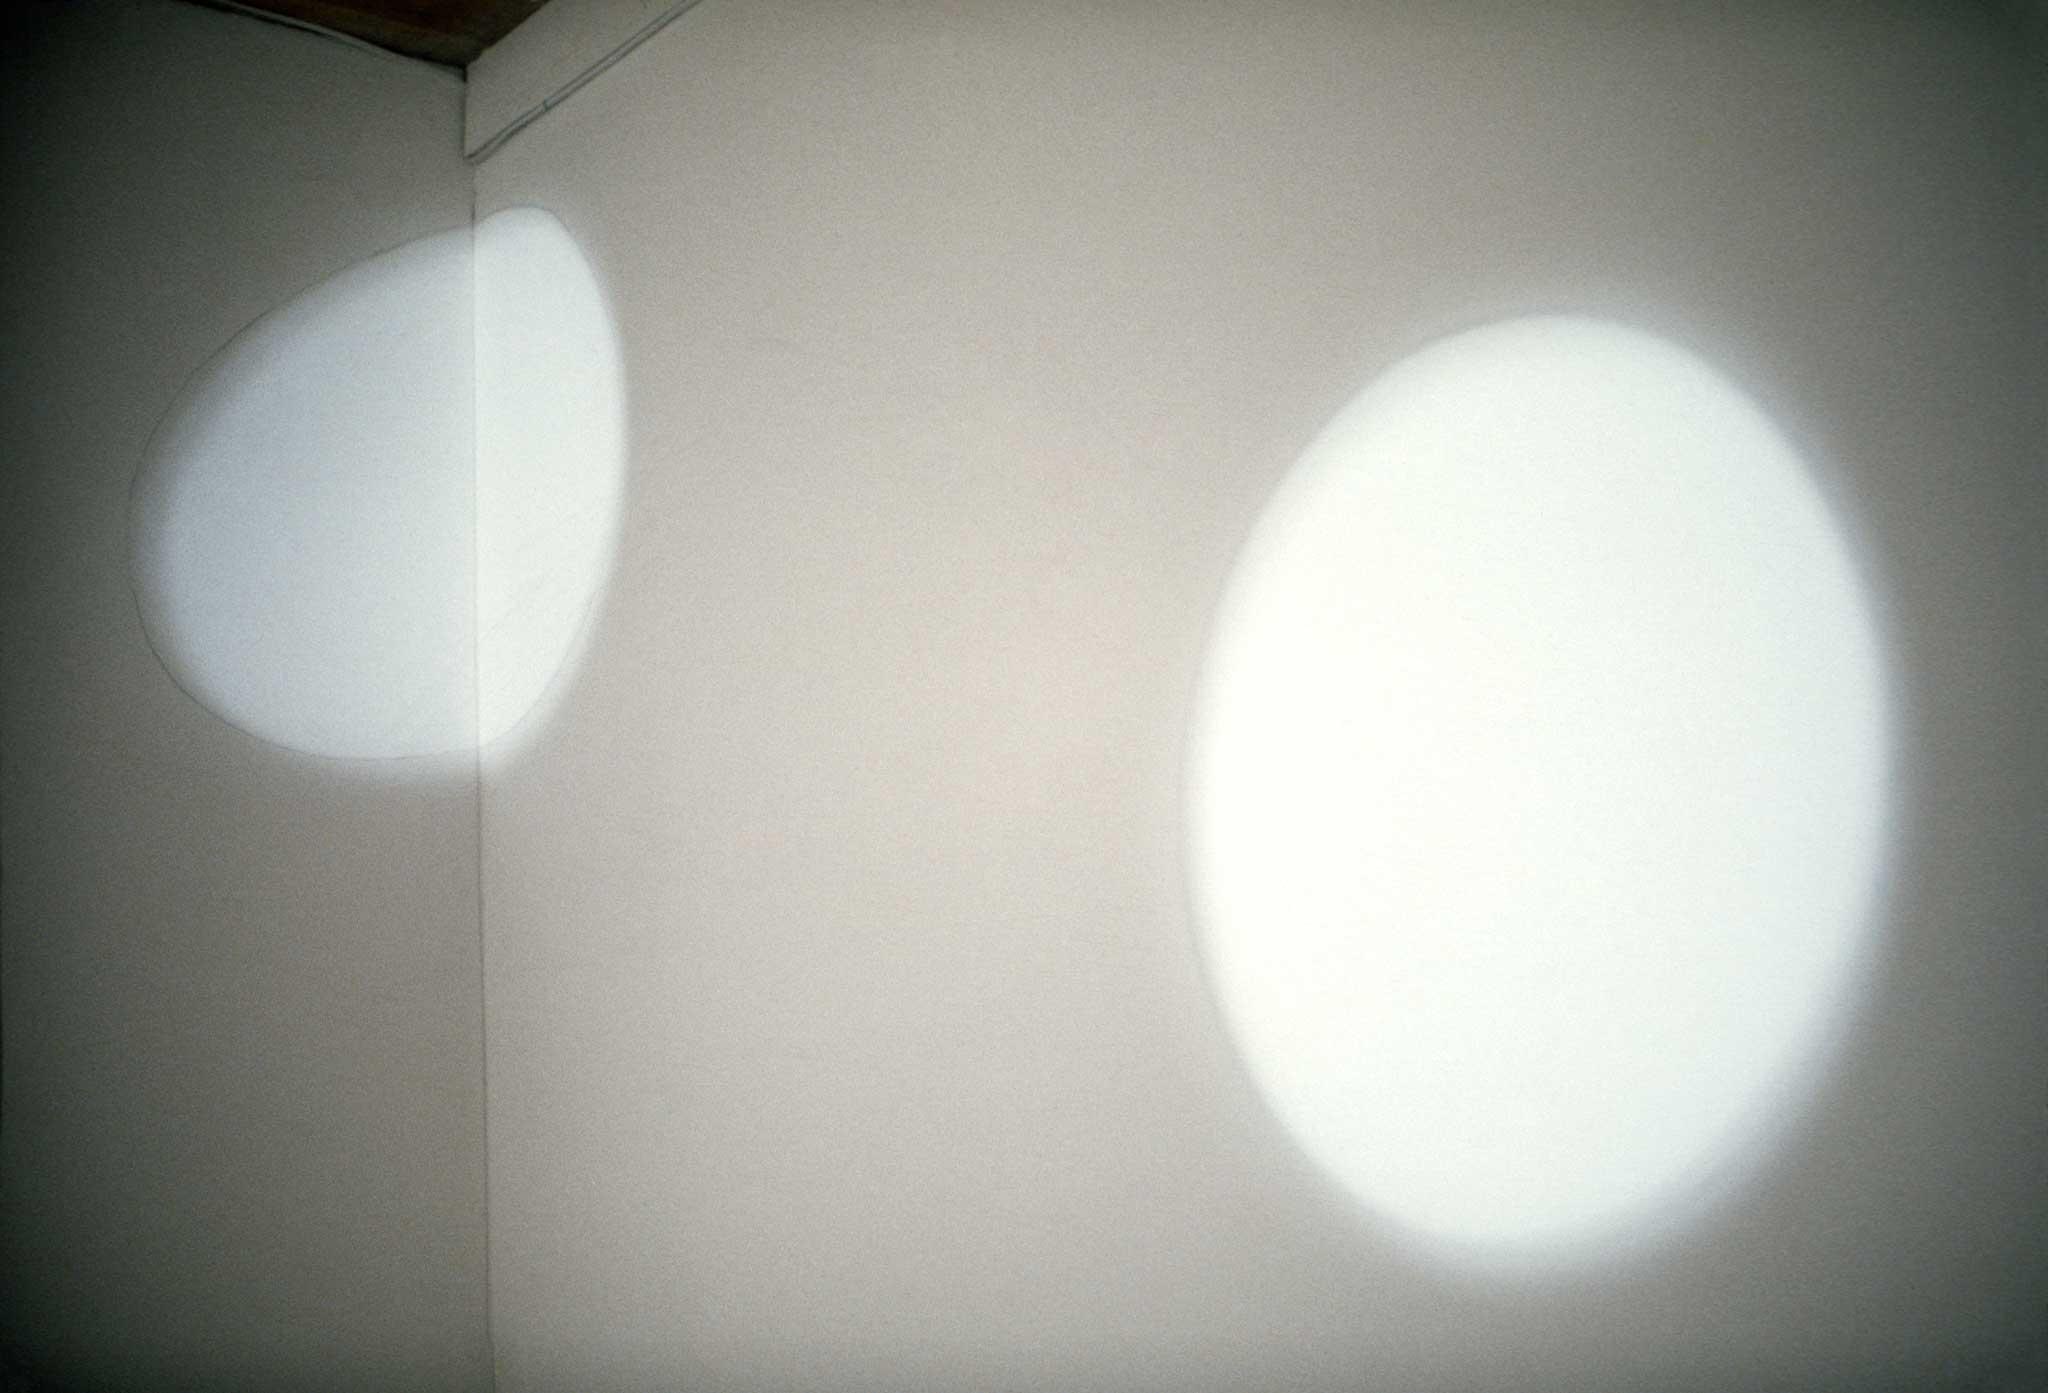 Light cast on a wall in the shape of a circle